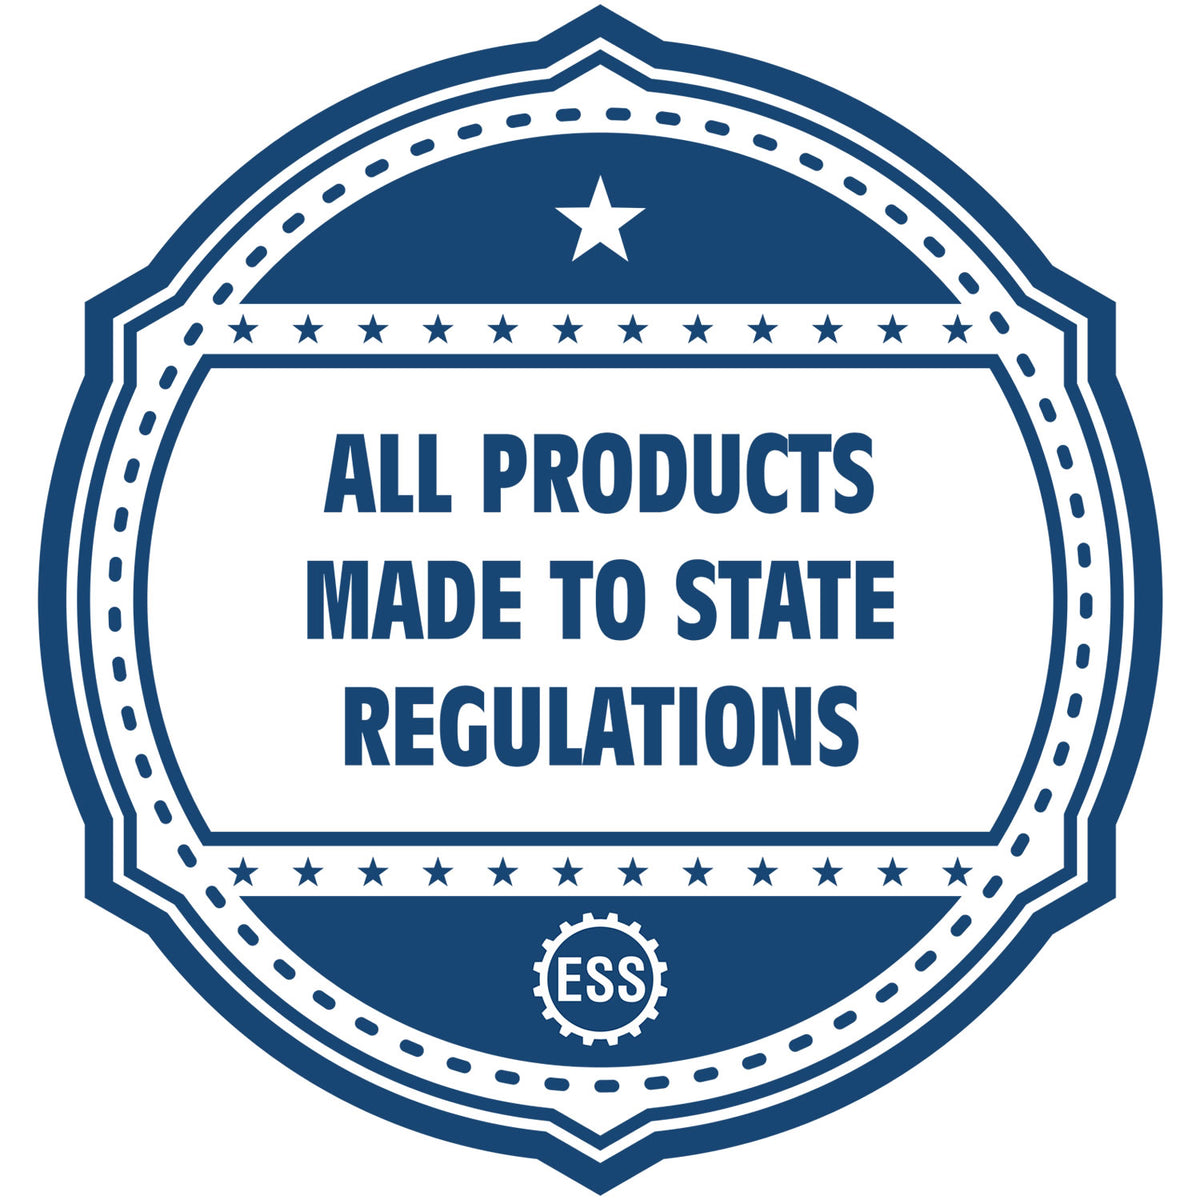 An icon or badge element for the Soft Arizona Professional Engineer Seal showing that this product is made in compliance with state regulations.